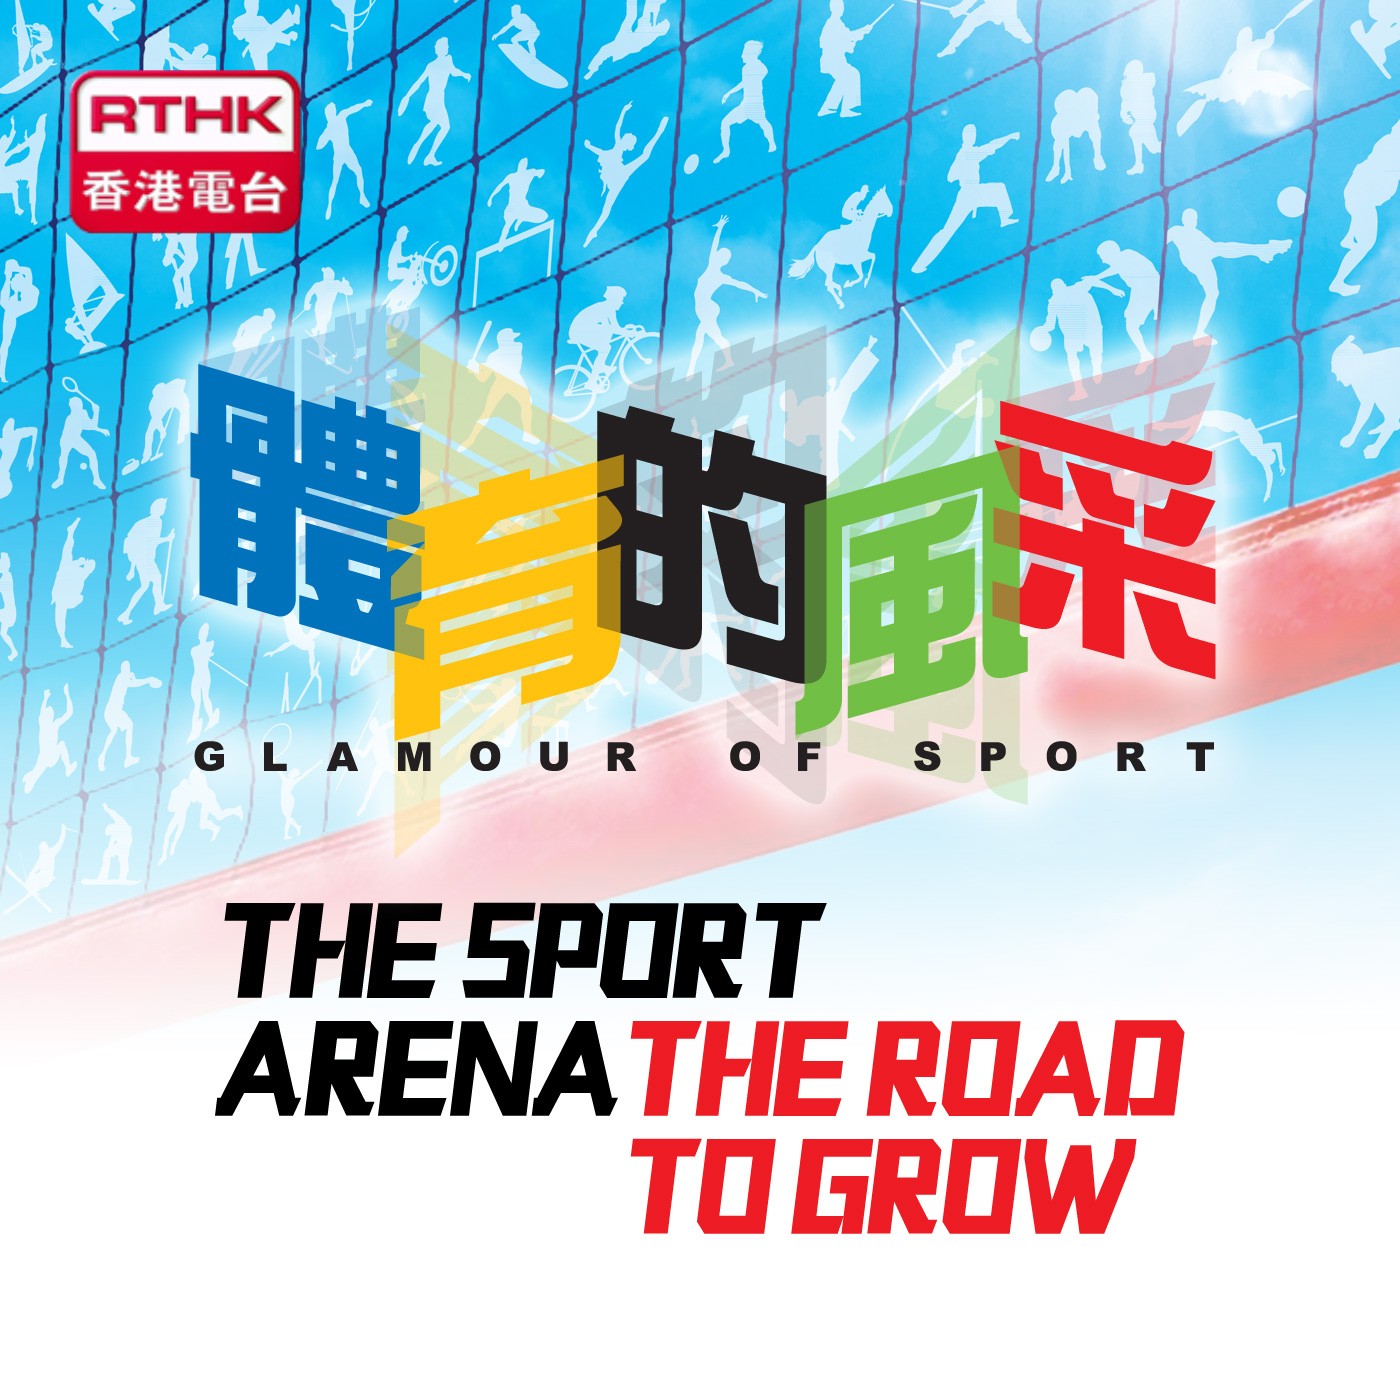 Glamour Of Sport - The Sport Arena The Road to Grow